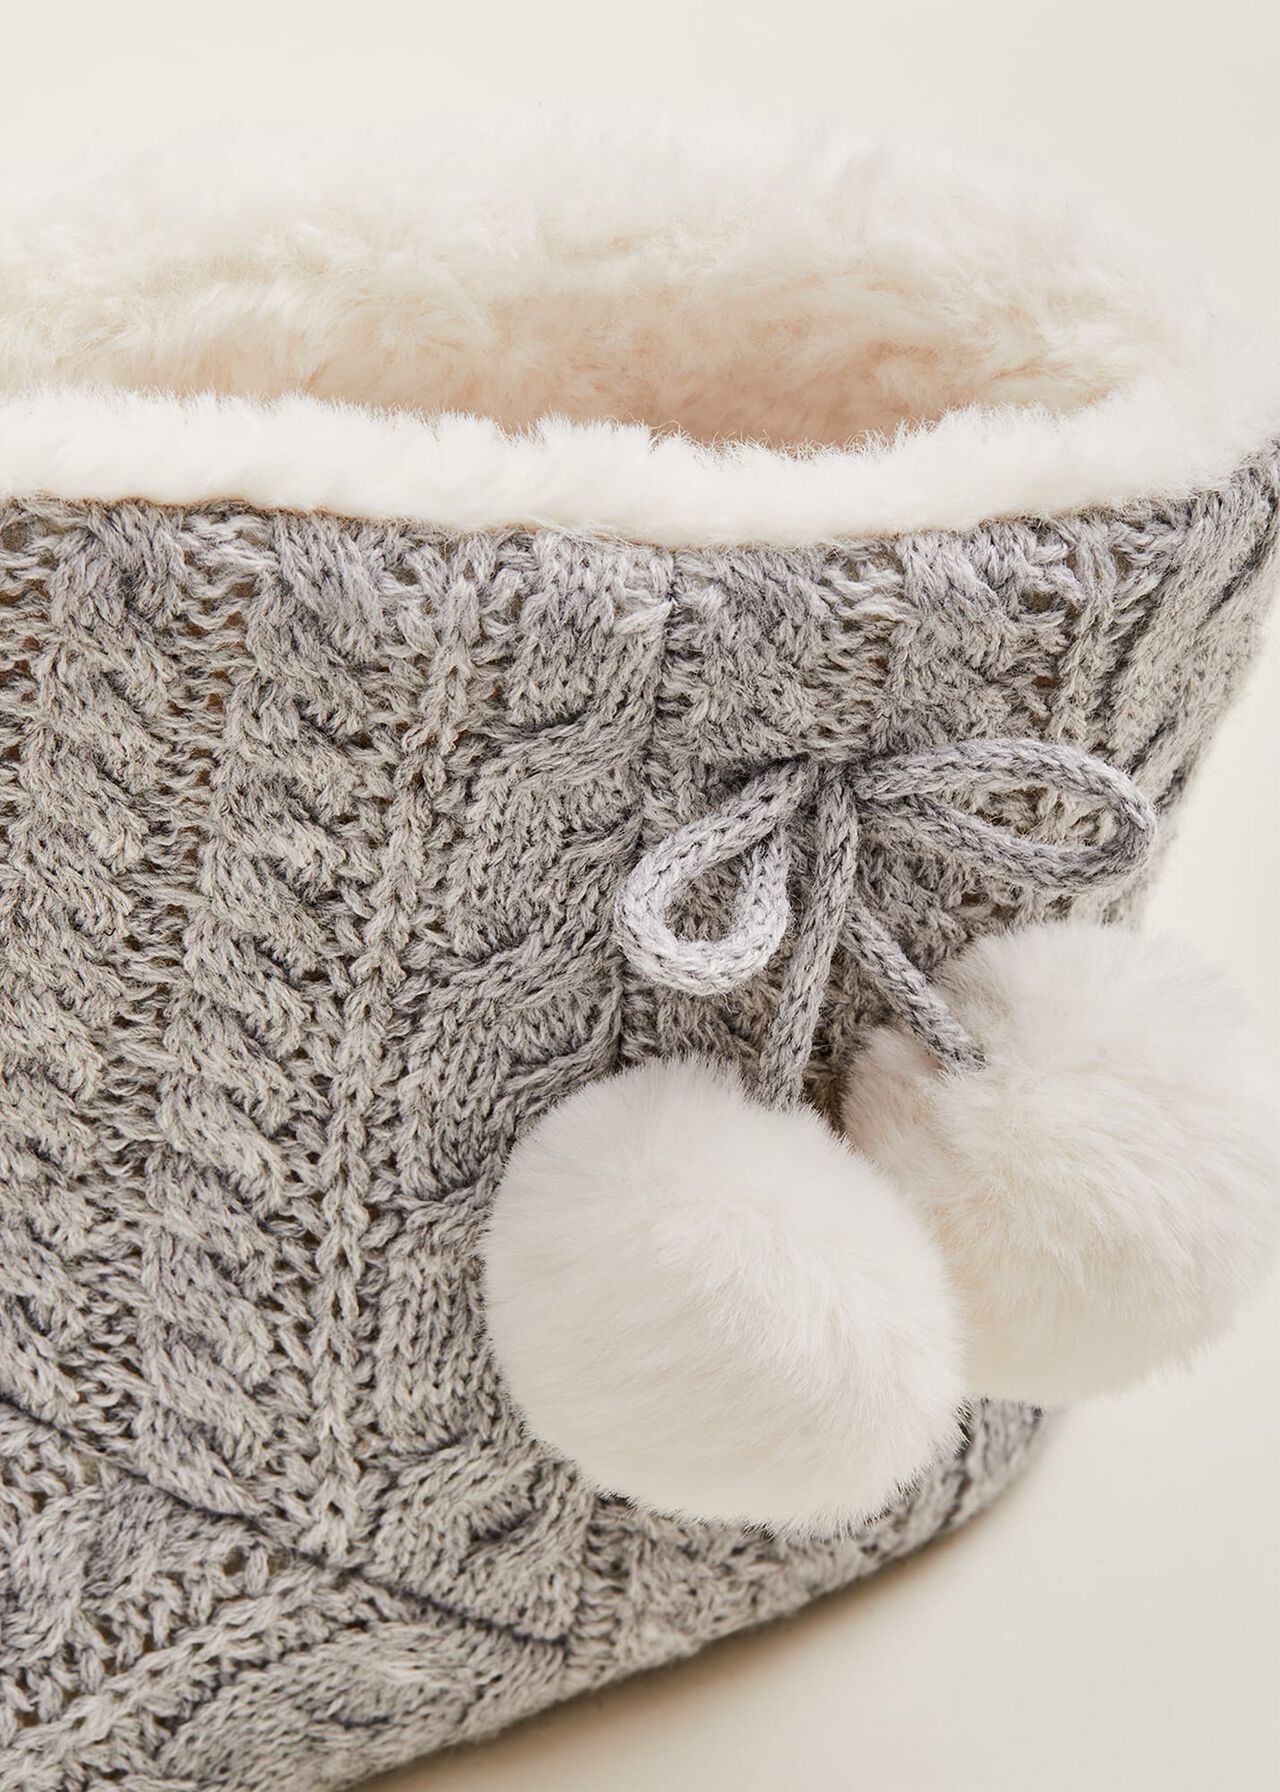 Cable Knit Slipper Boots